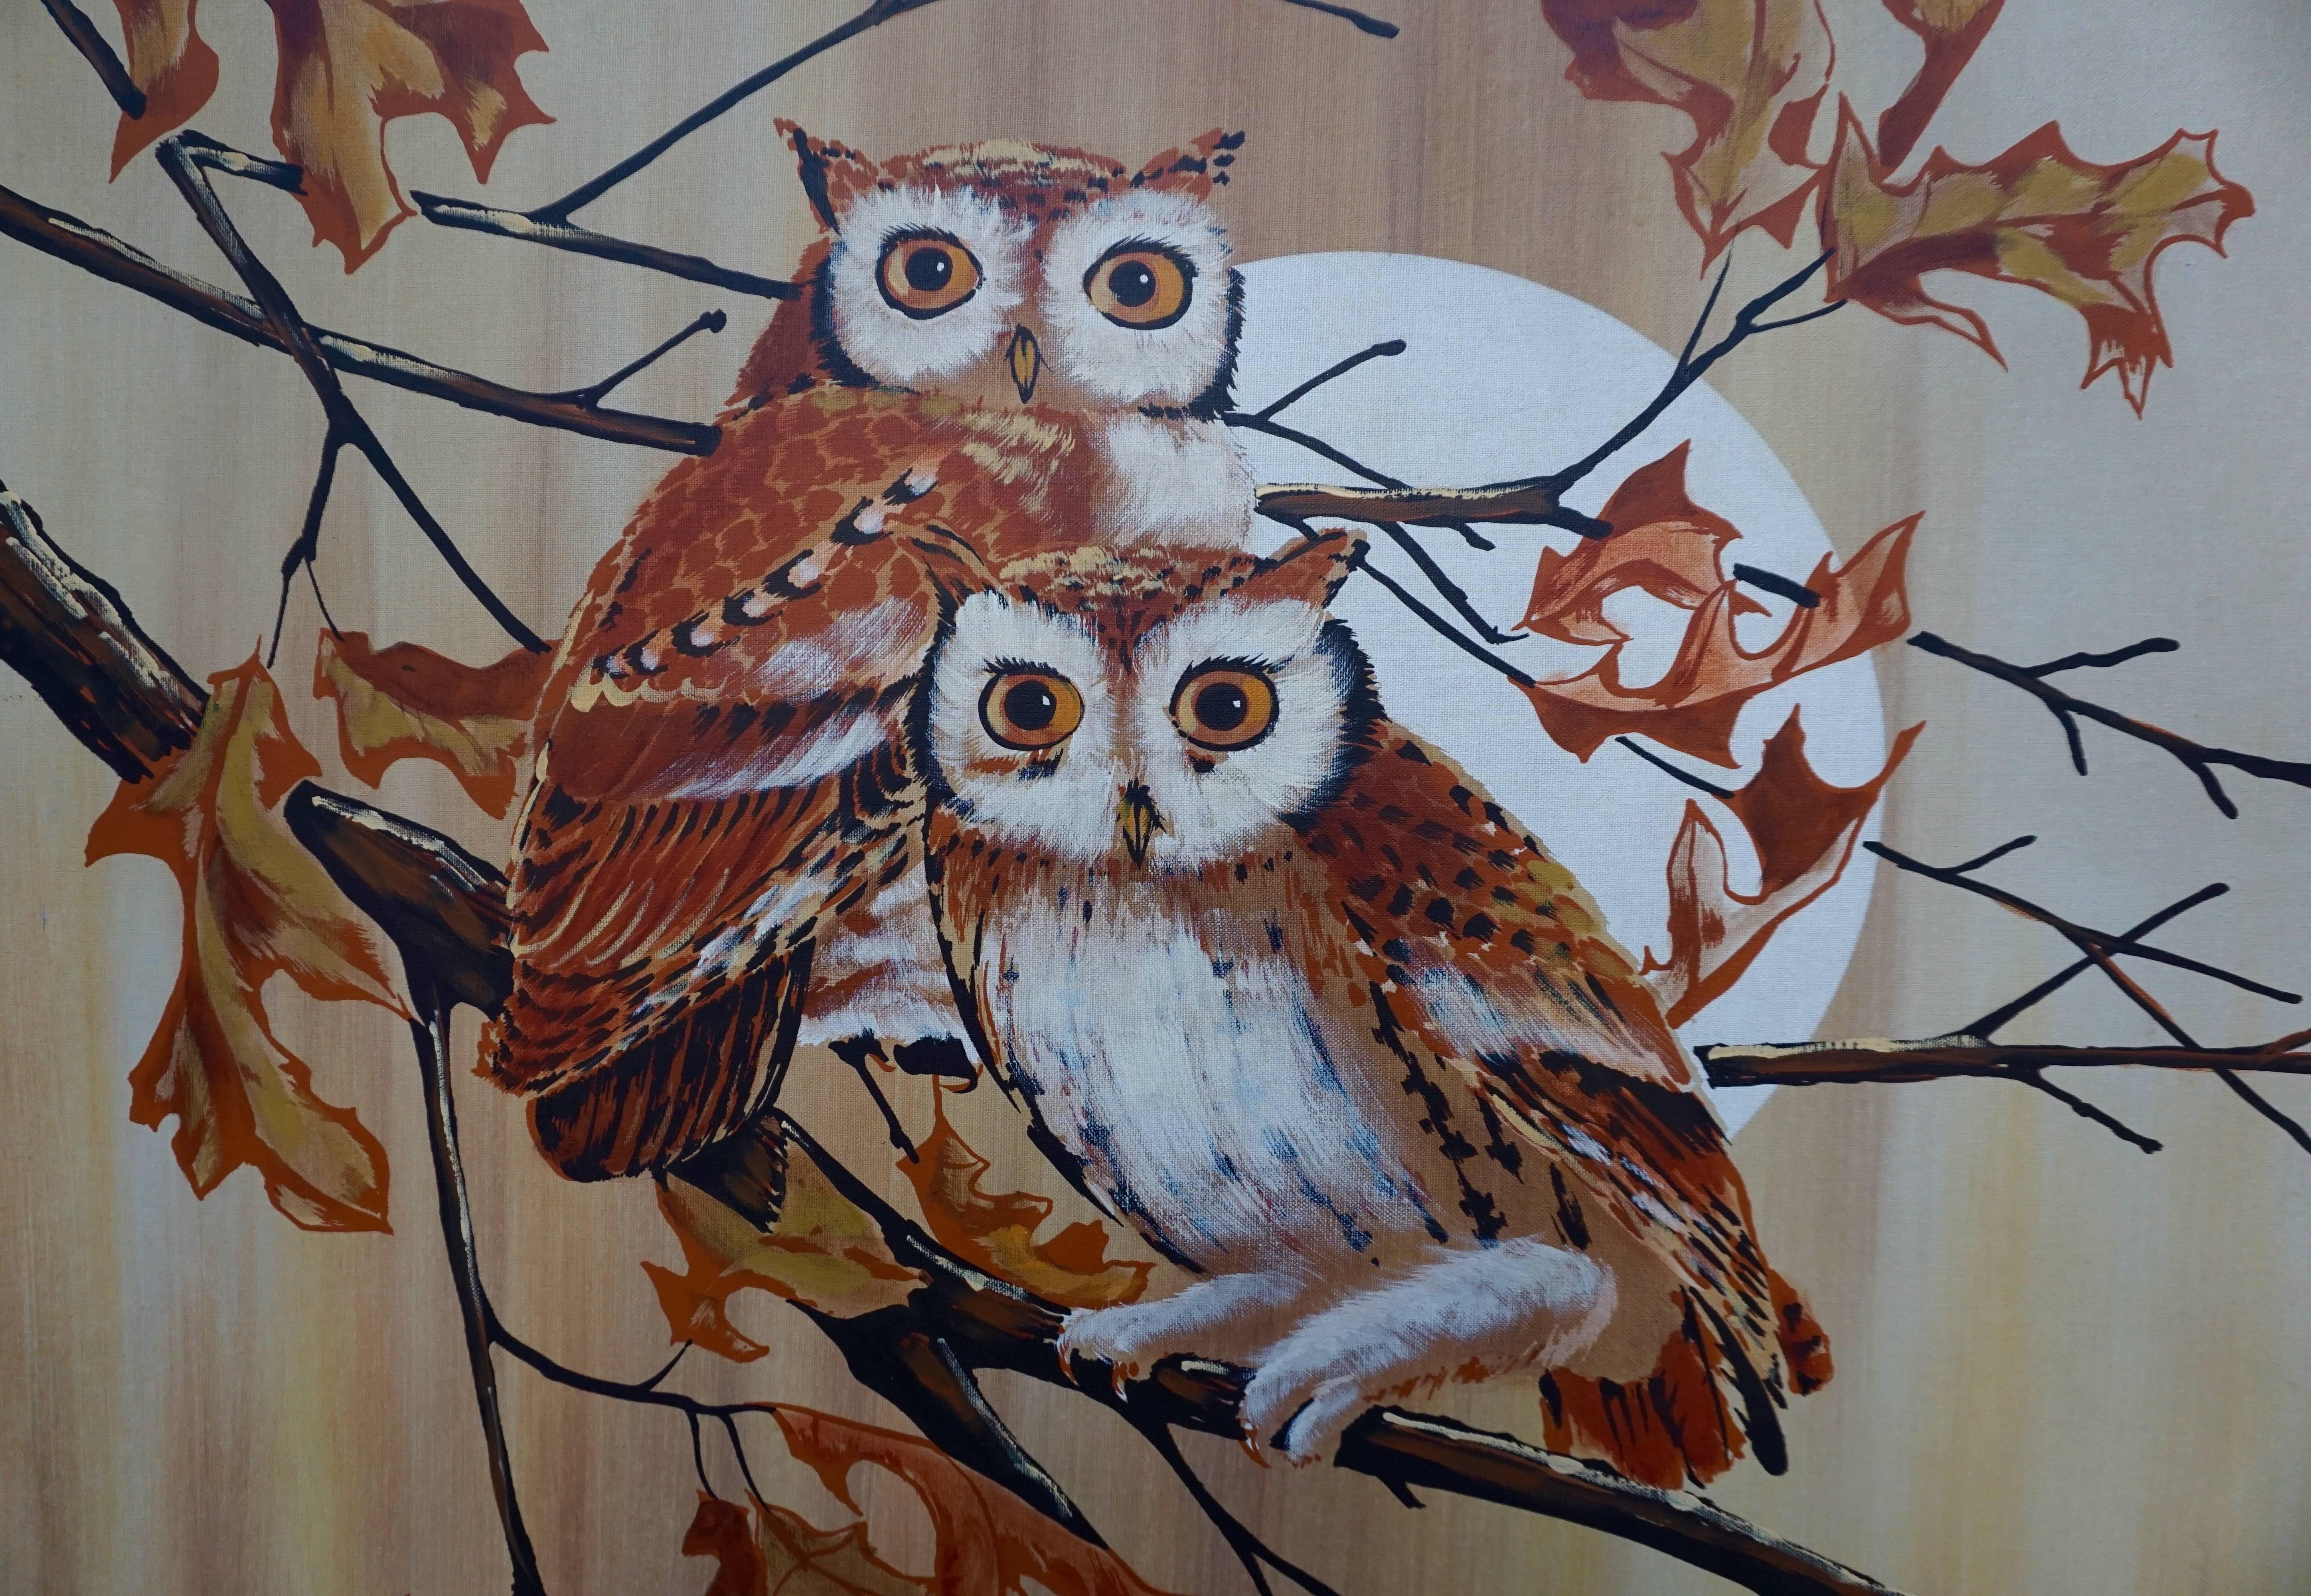 Midcentury painting depicts a pair of owls perched on a tree branch. 
Signature unknown.
Width 95 cm.
height 95 cm.